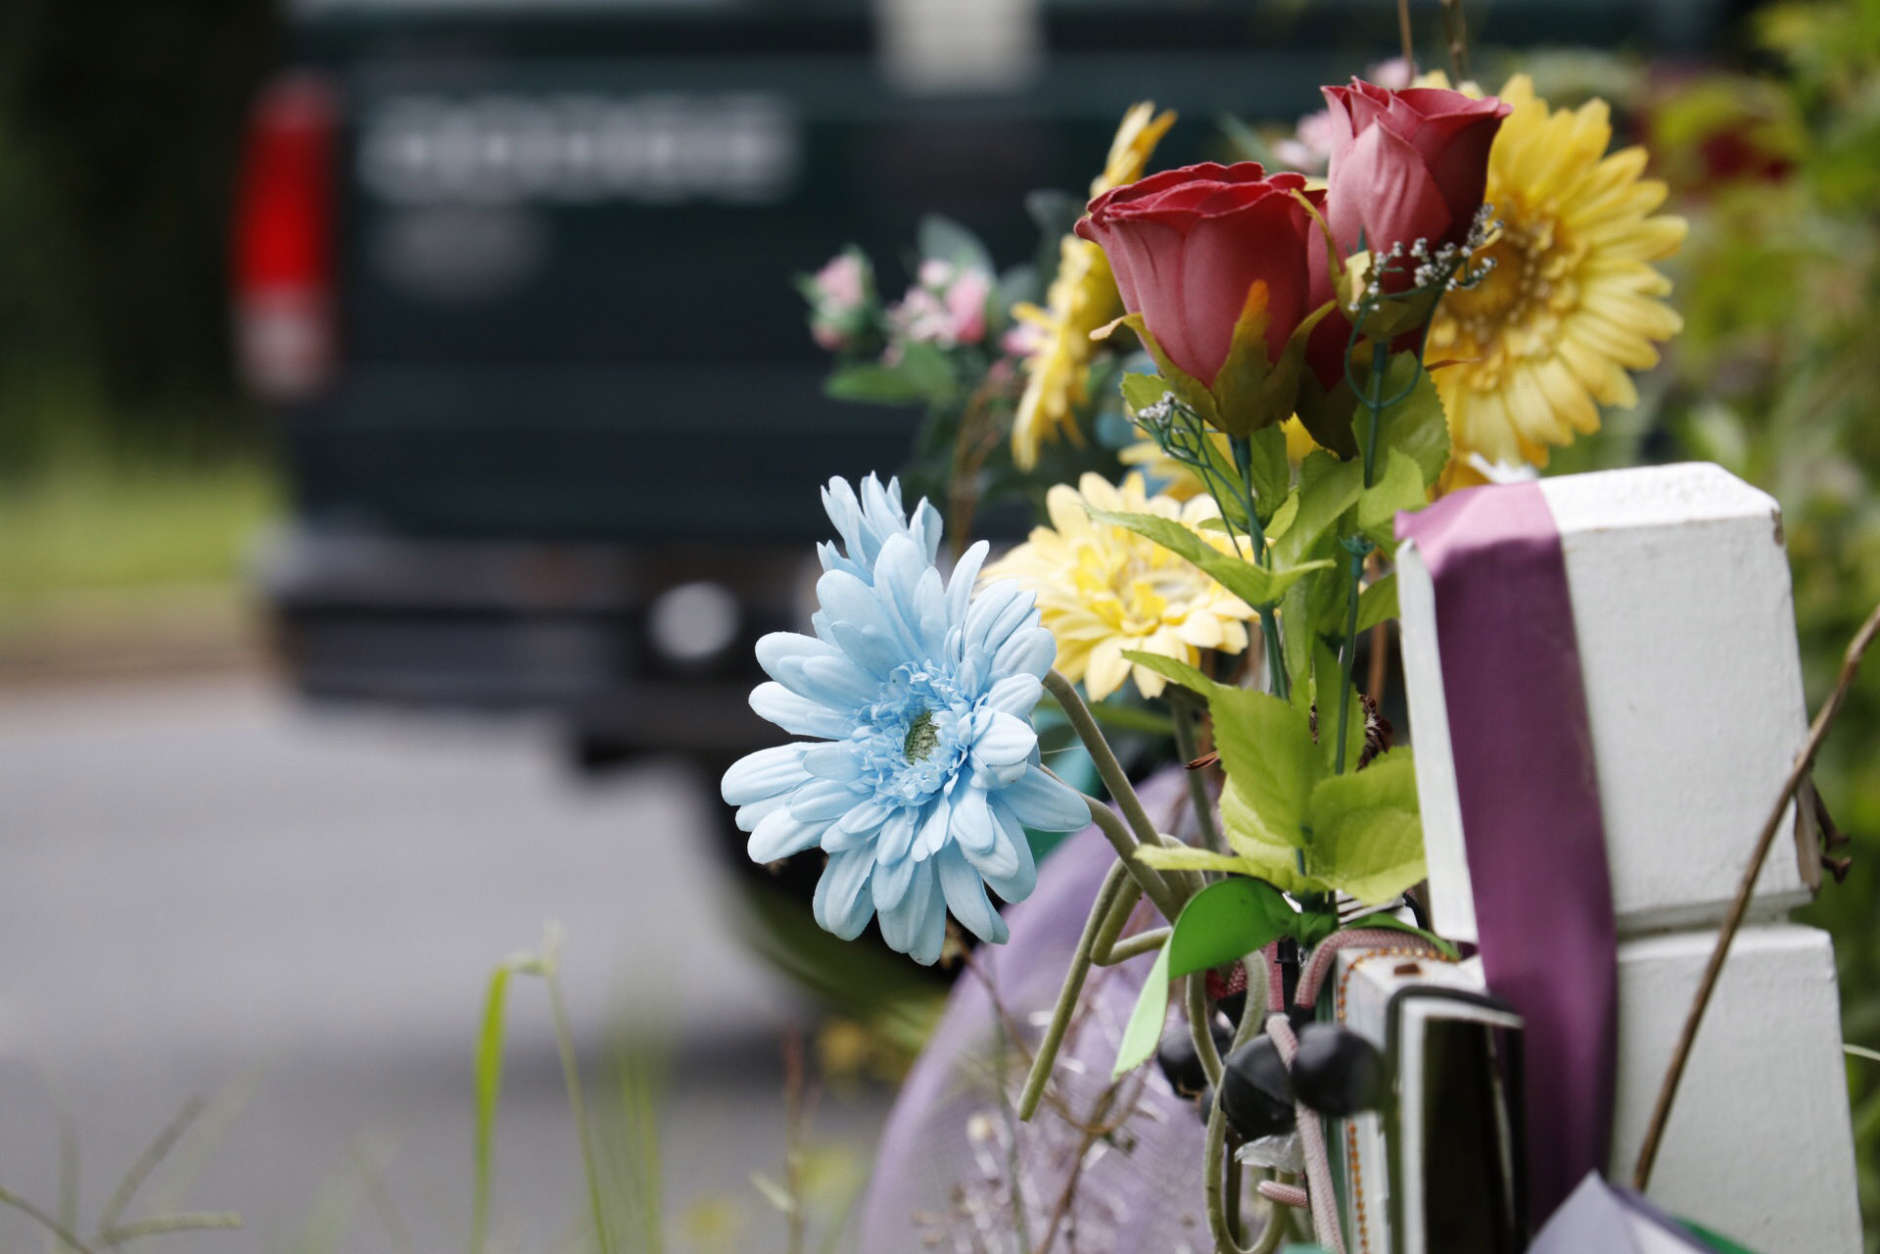 A memorial sits near the Bethesda intersection, where safety concerns are being addressed. (WTOP/Kate Ryan)